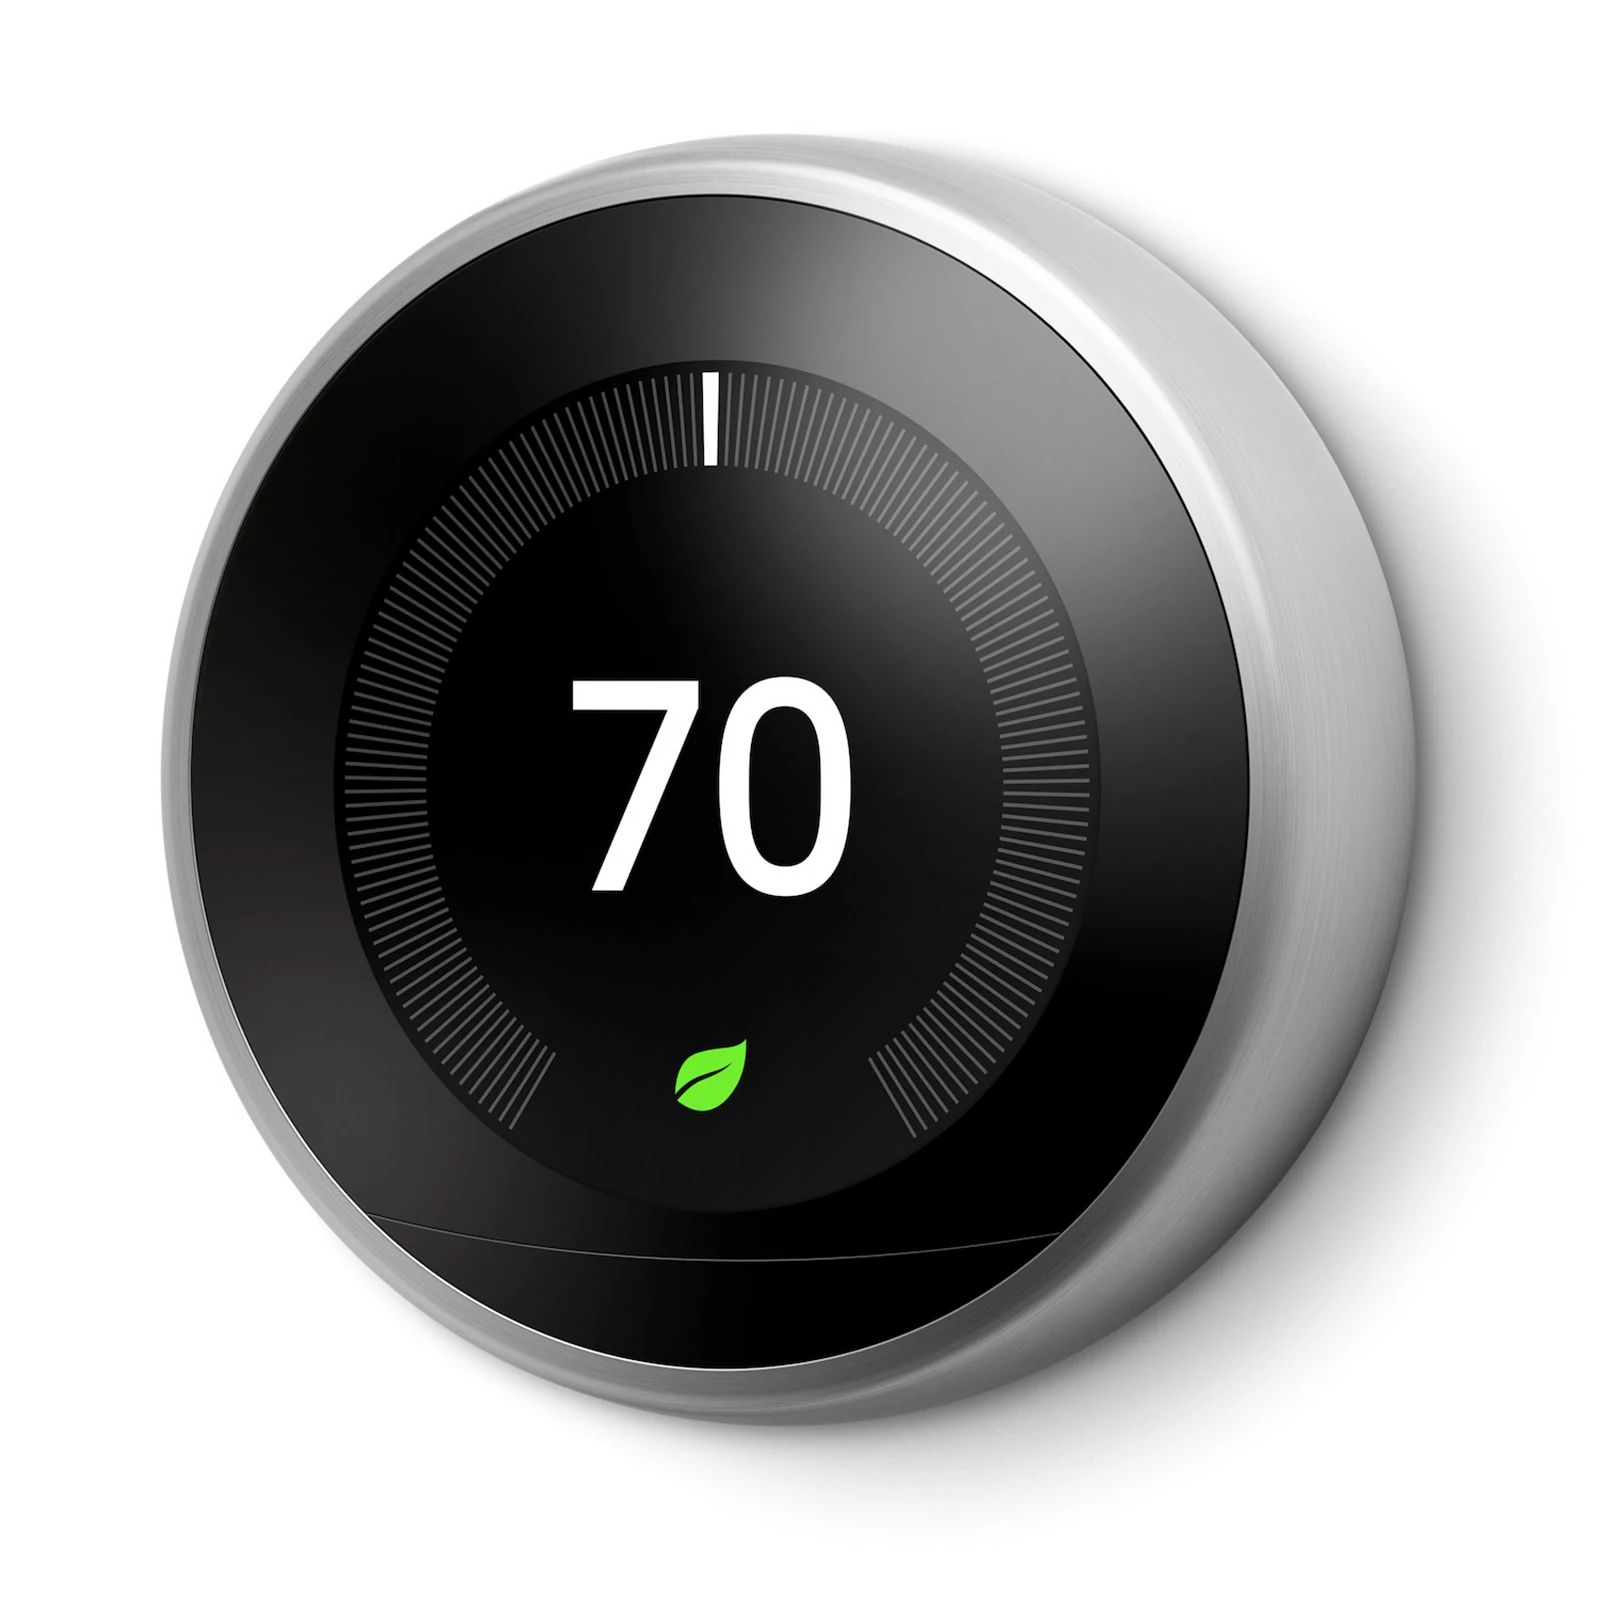 Google Nest Learning Thermostat (3rd Generation), Silver | Kohl's